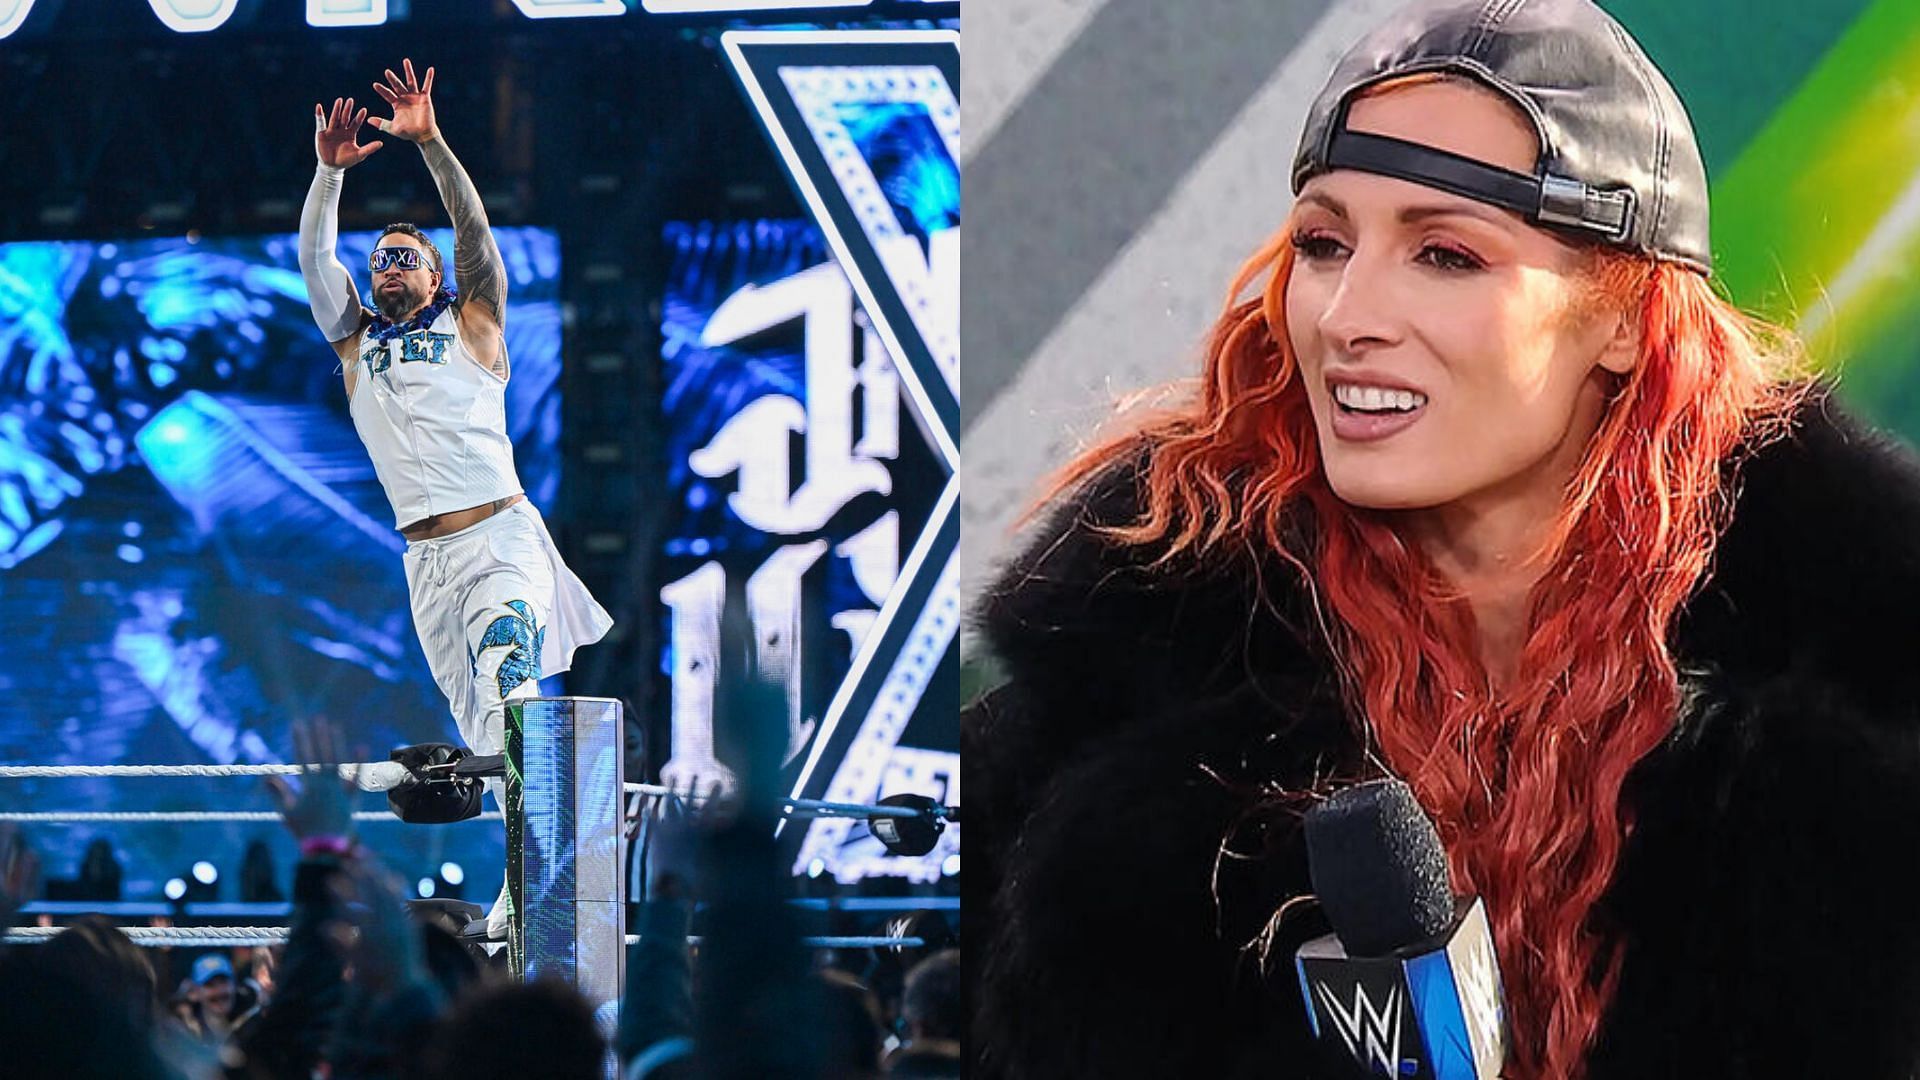 Jey Uso and Becky Lynch shared a moment at a recent WWE Live Event